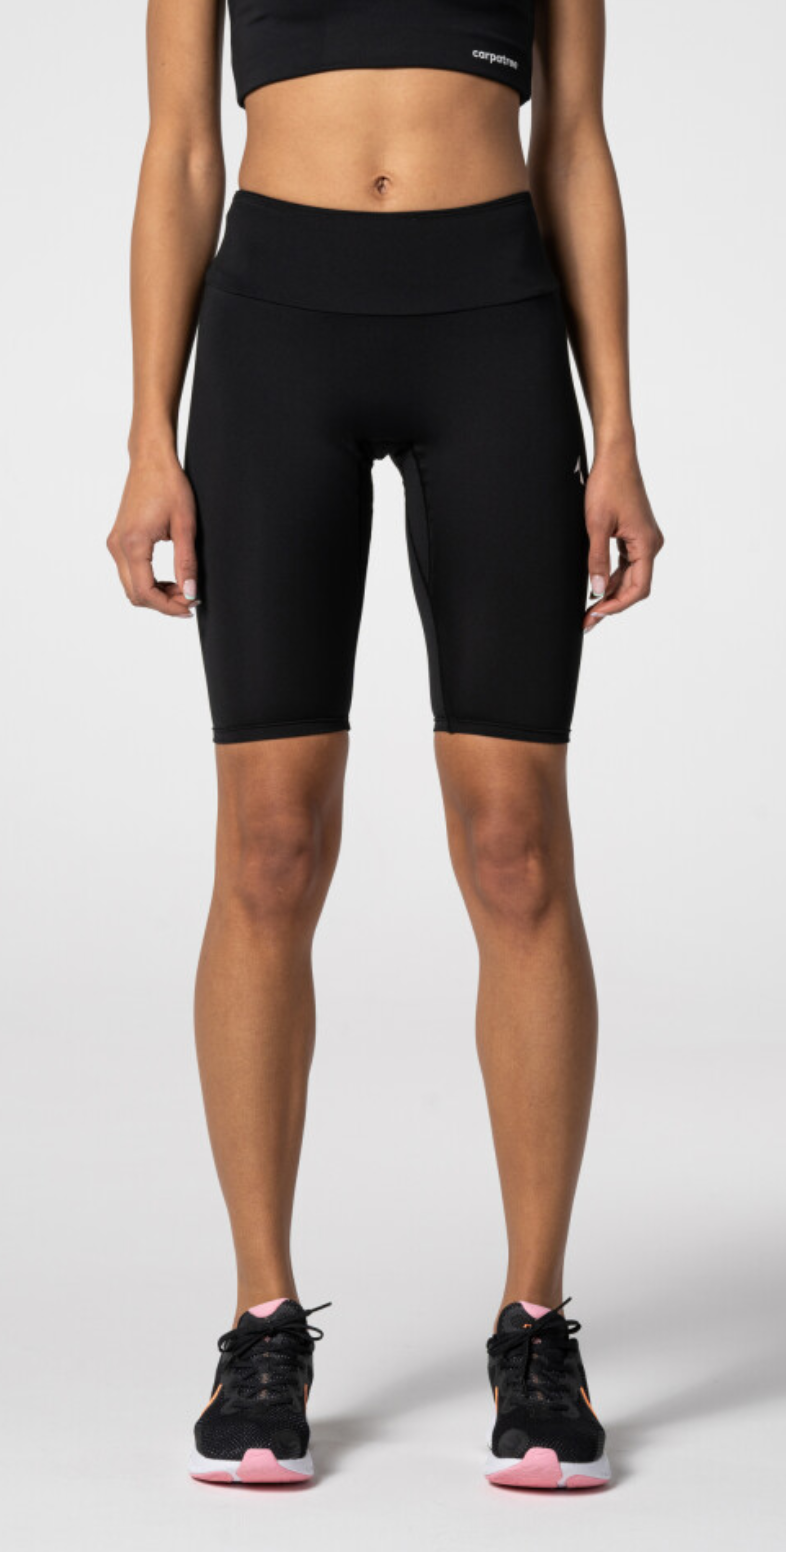 Carpatree Spark Biker Shorts - Black semi seamless biker sports with a high deep waistband and gusset. Made of soft and strong quick-drying breathable fabric, letting you train effectively and comfortably.